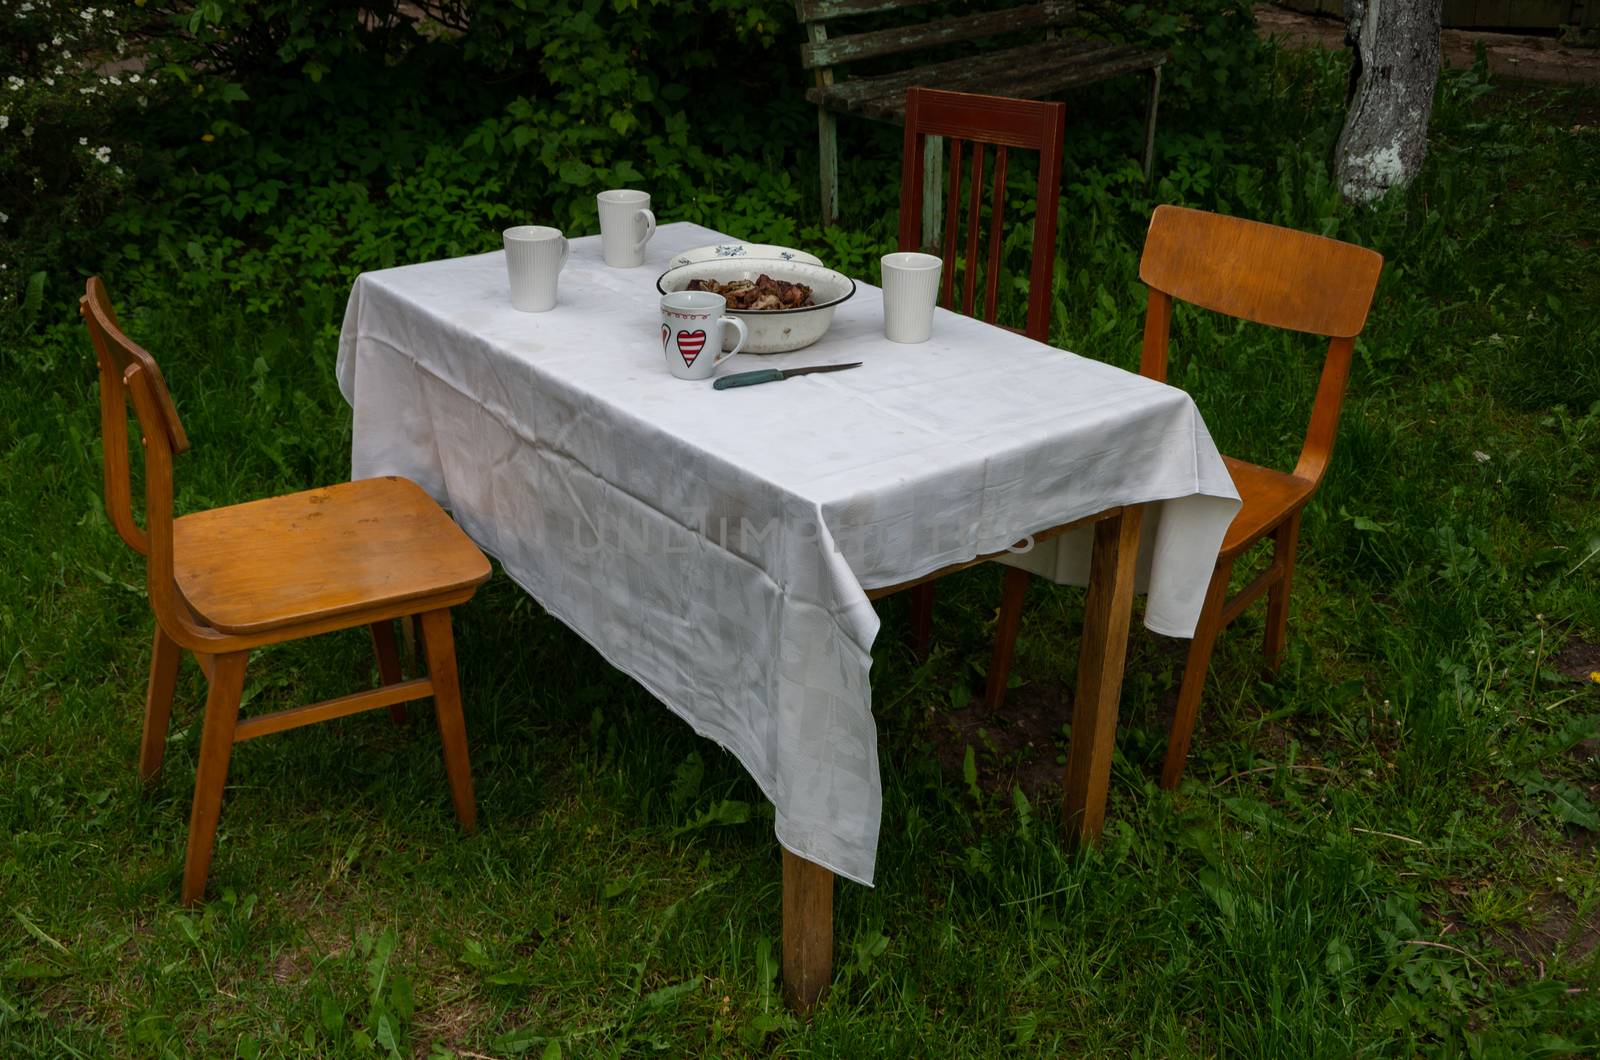 Outside table with mugs and meat and old chairs, white